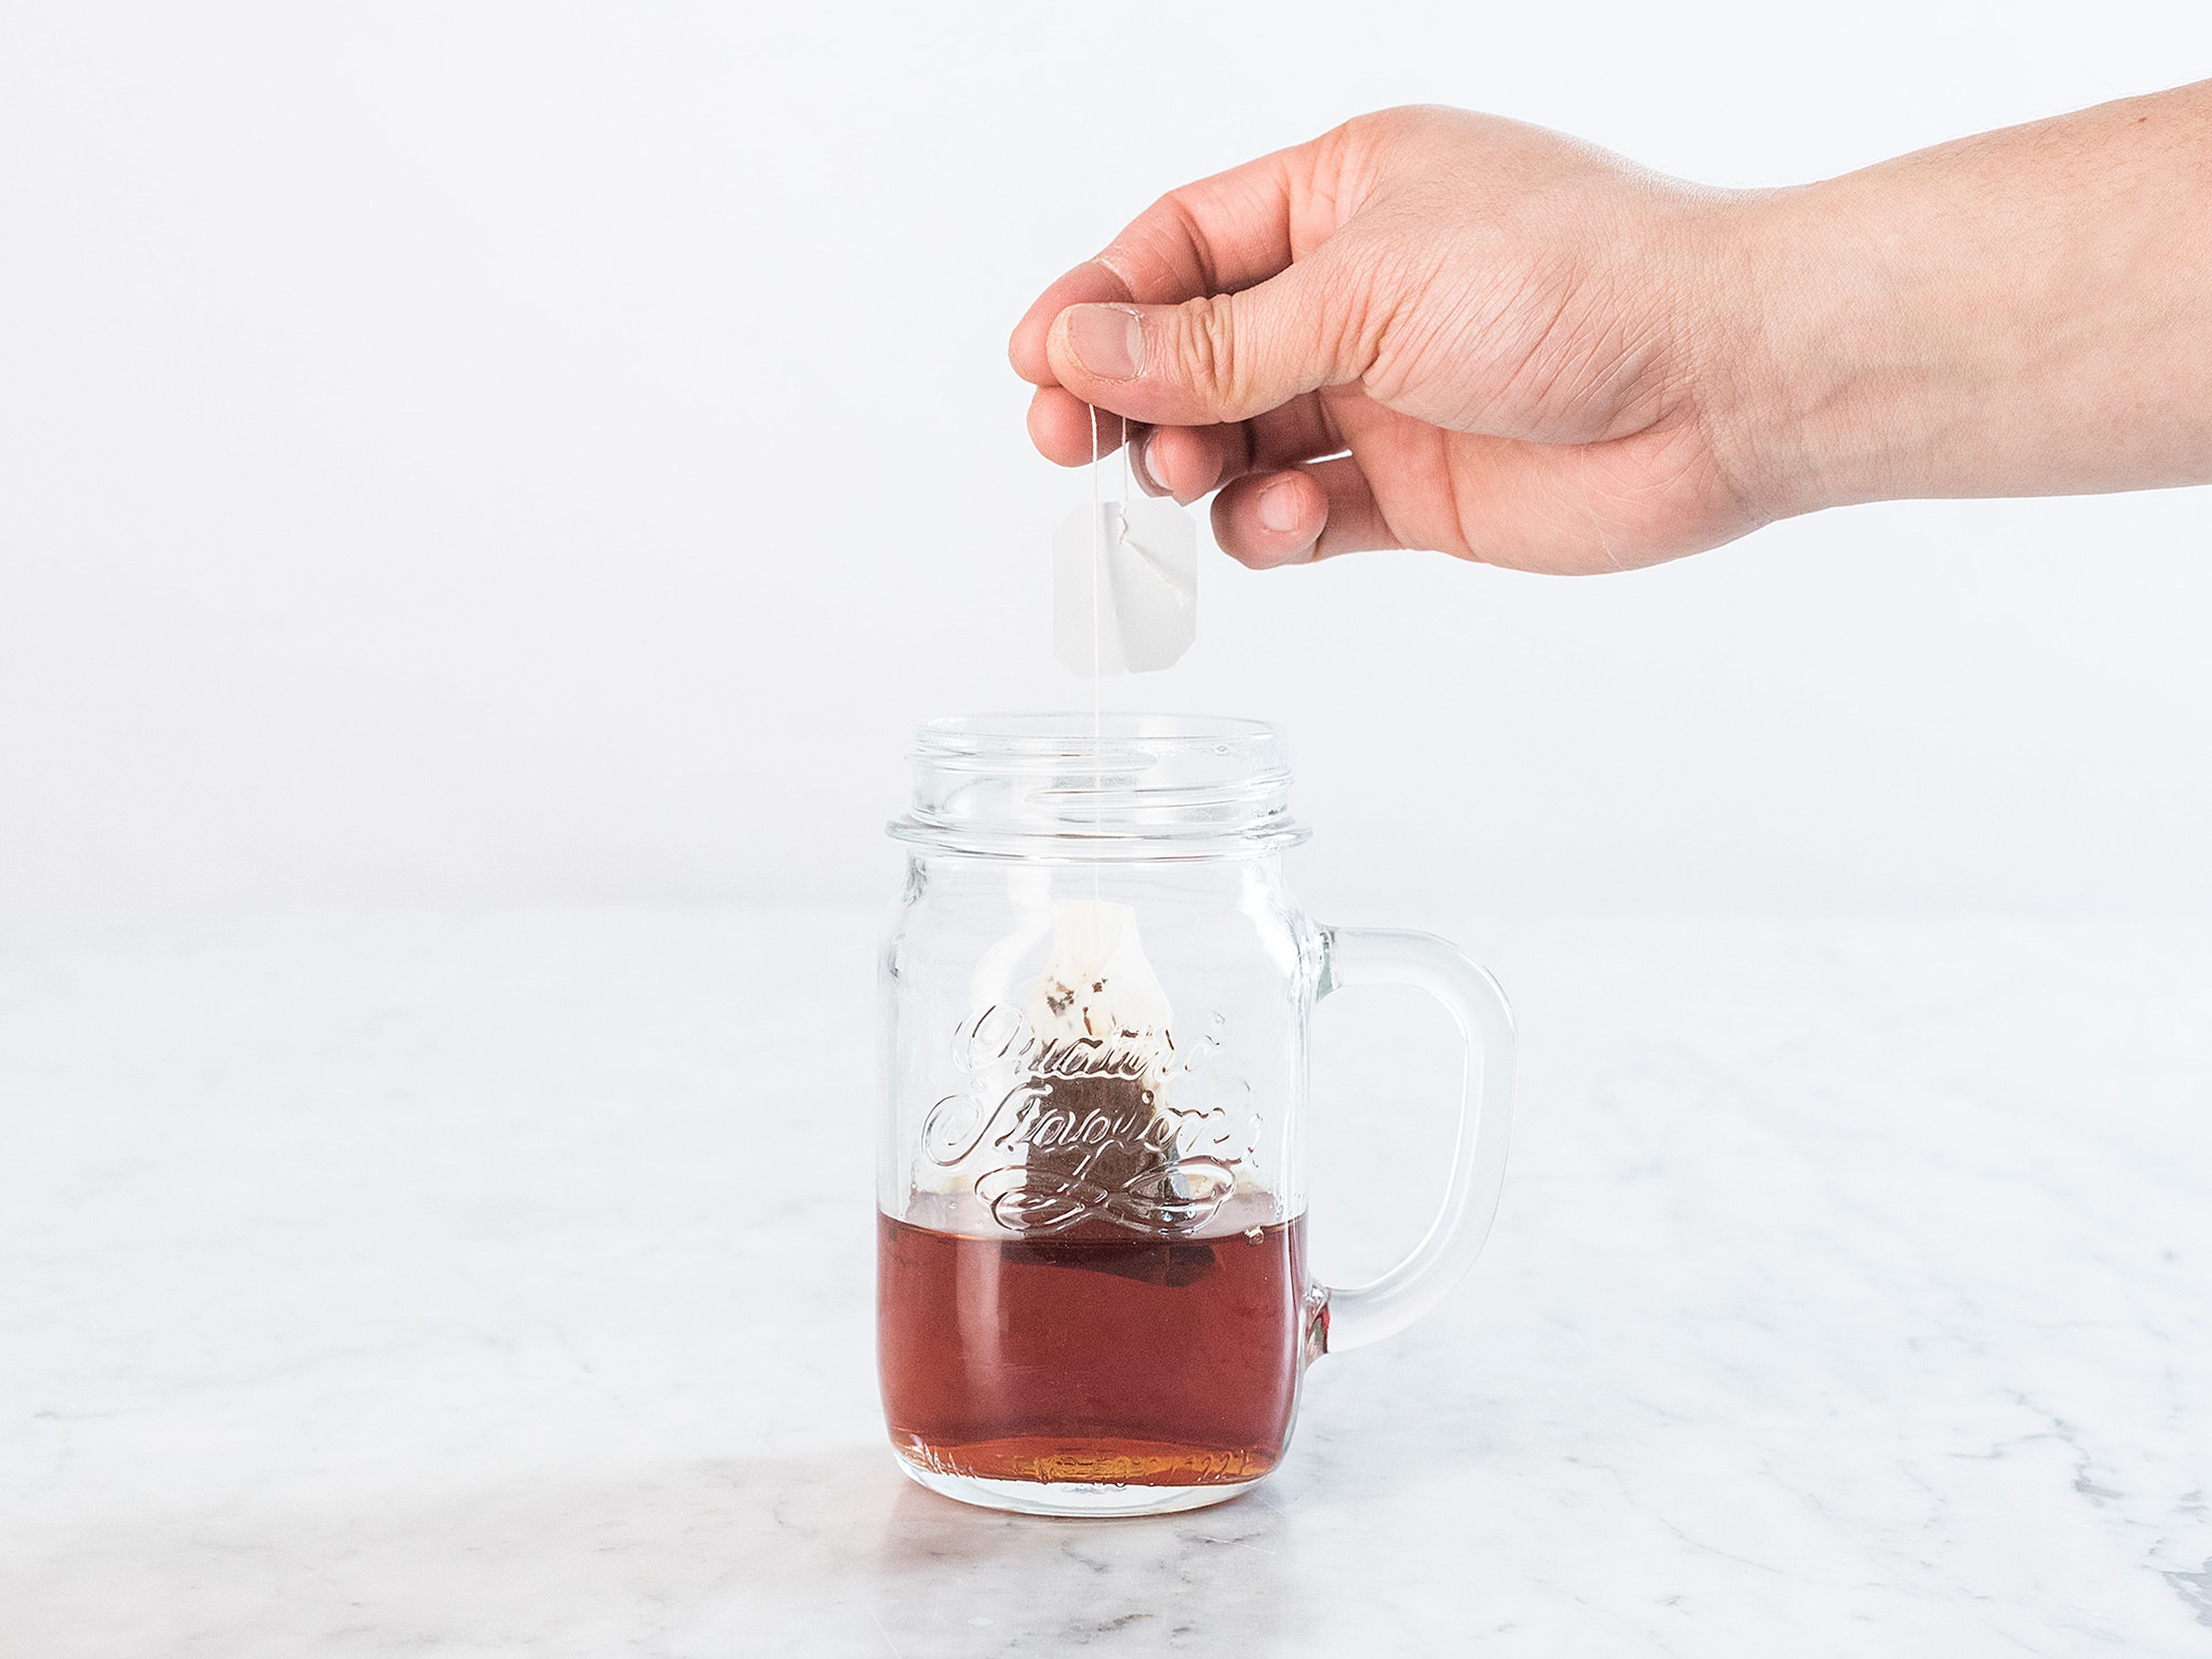 Add hot water to a mug, add teabag, and allow to steep for approx. 5 min. Transfer to refrigerator to cool for approx. 10 min.